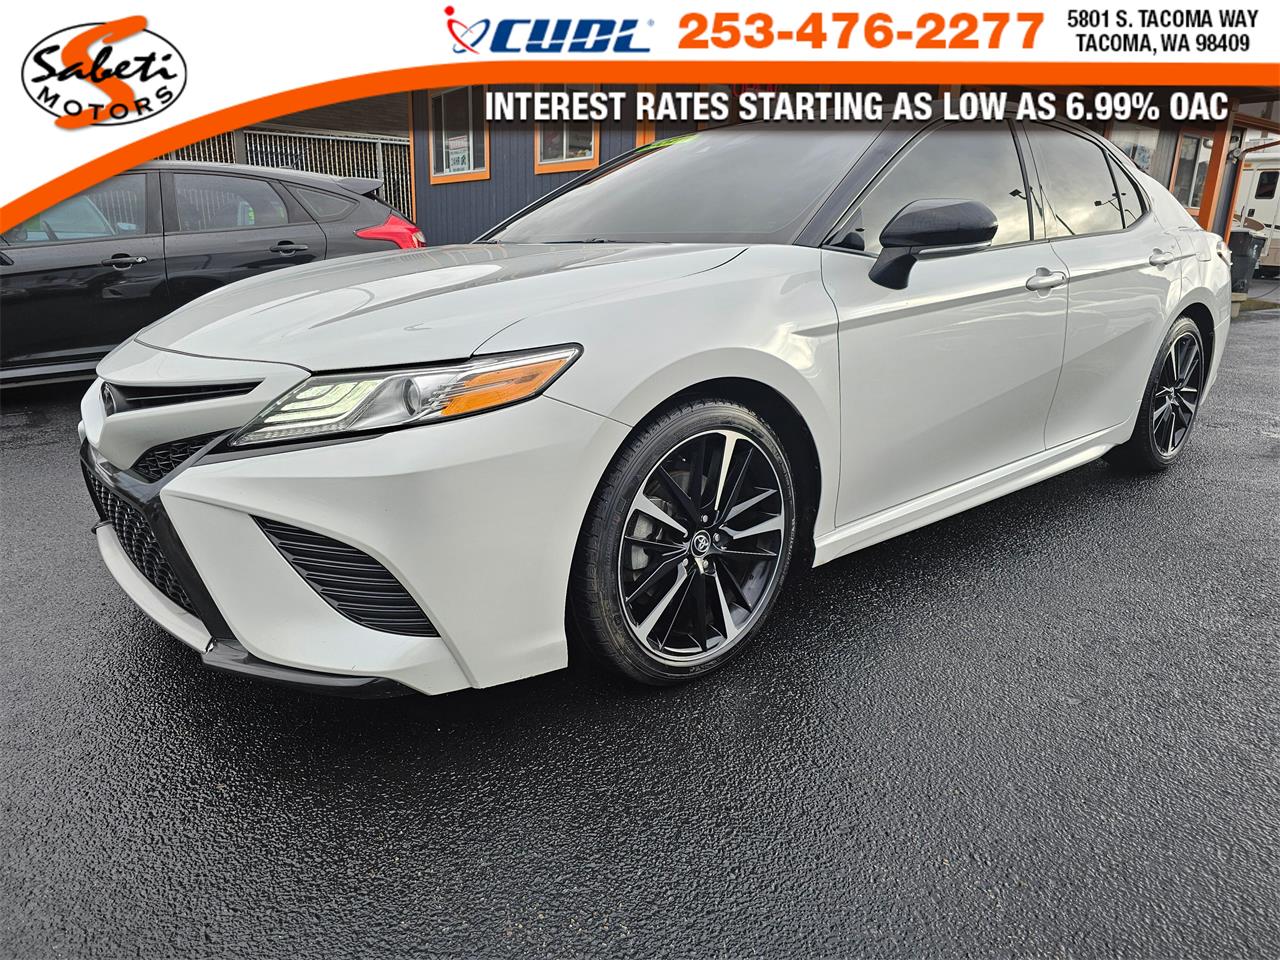 For Sale: 2020 Toyota Camry in Tacoma, Washington for sale in Tacoma, WA